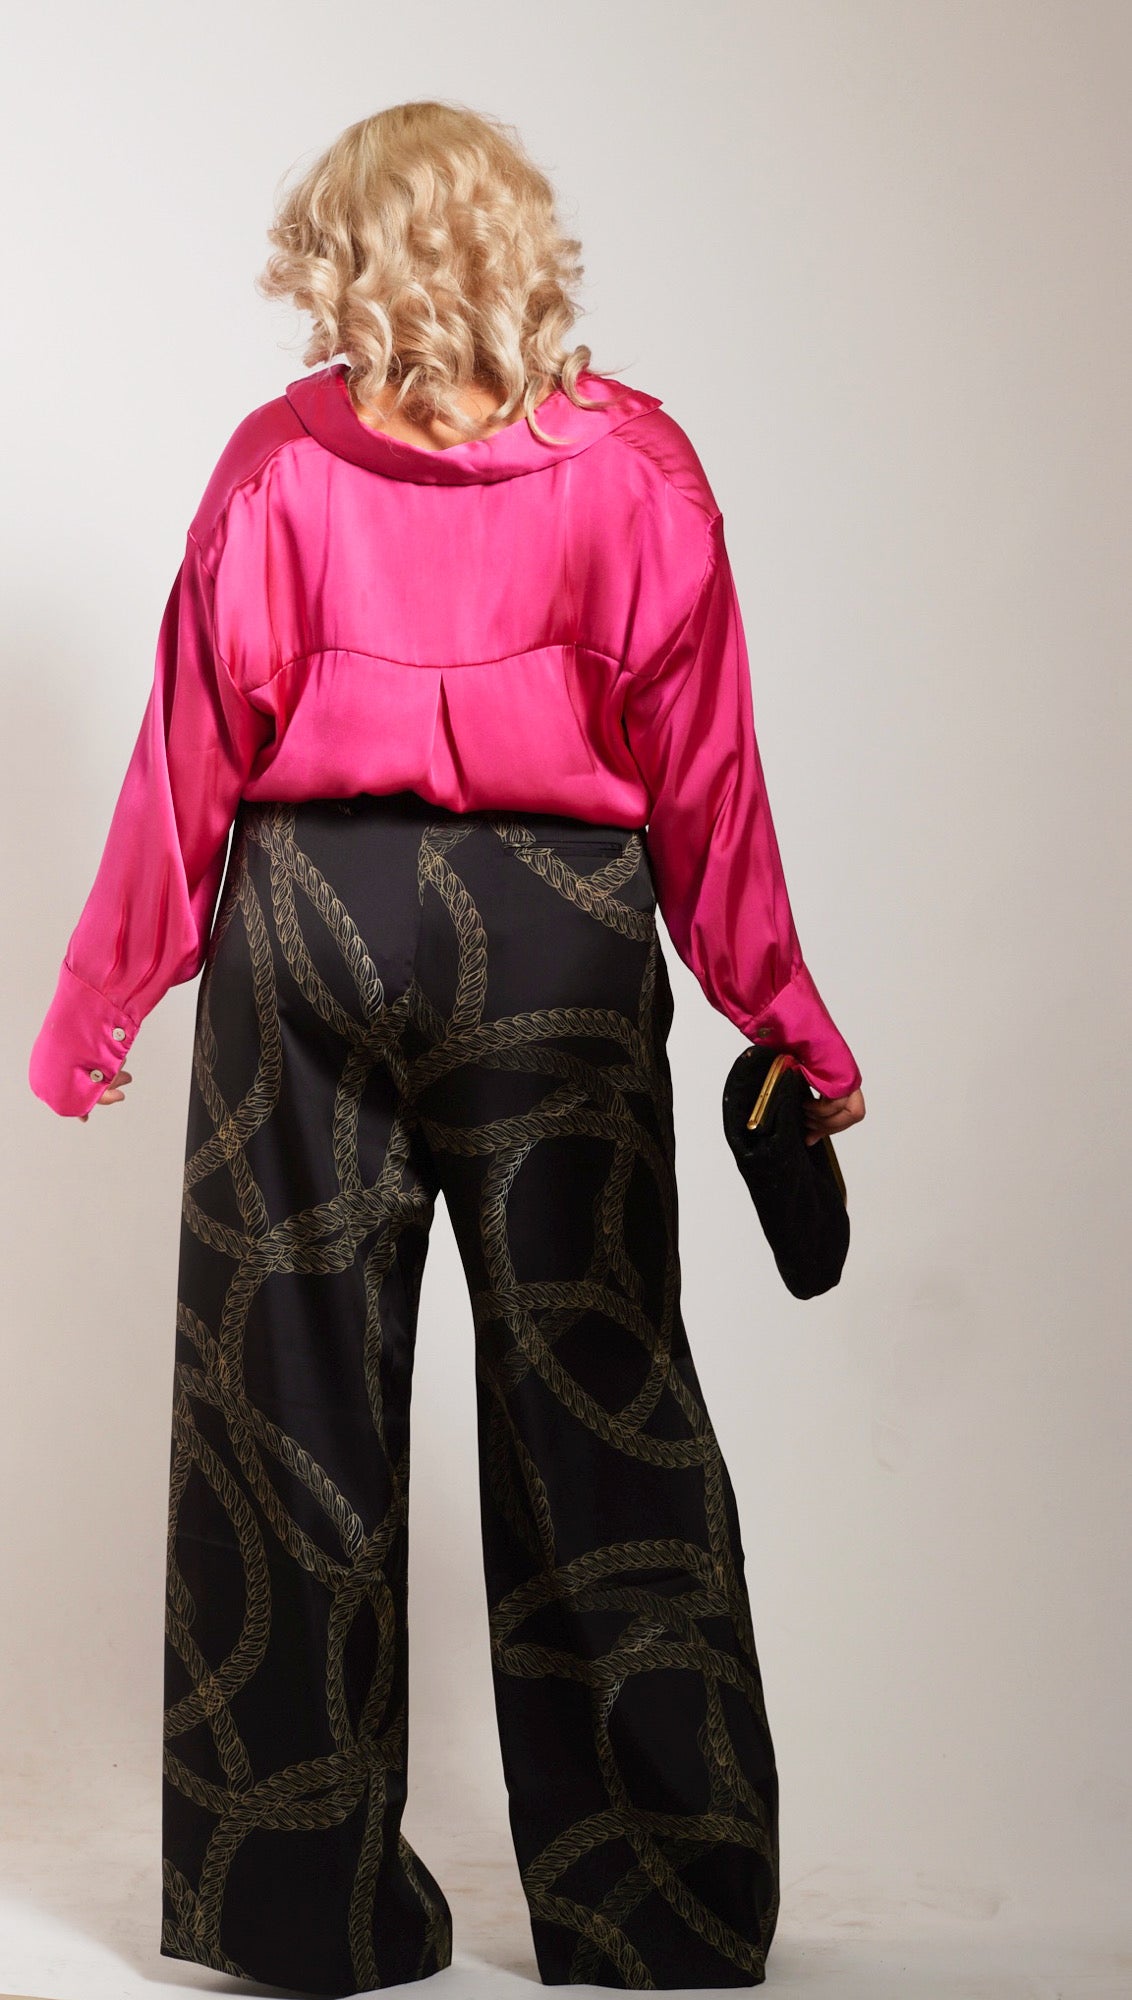 back profile of woman wearing black and gold chain printed yacht slacks and pink blouse